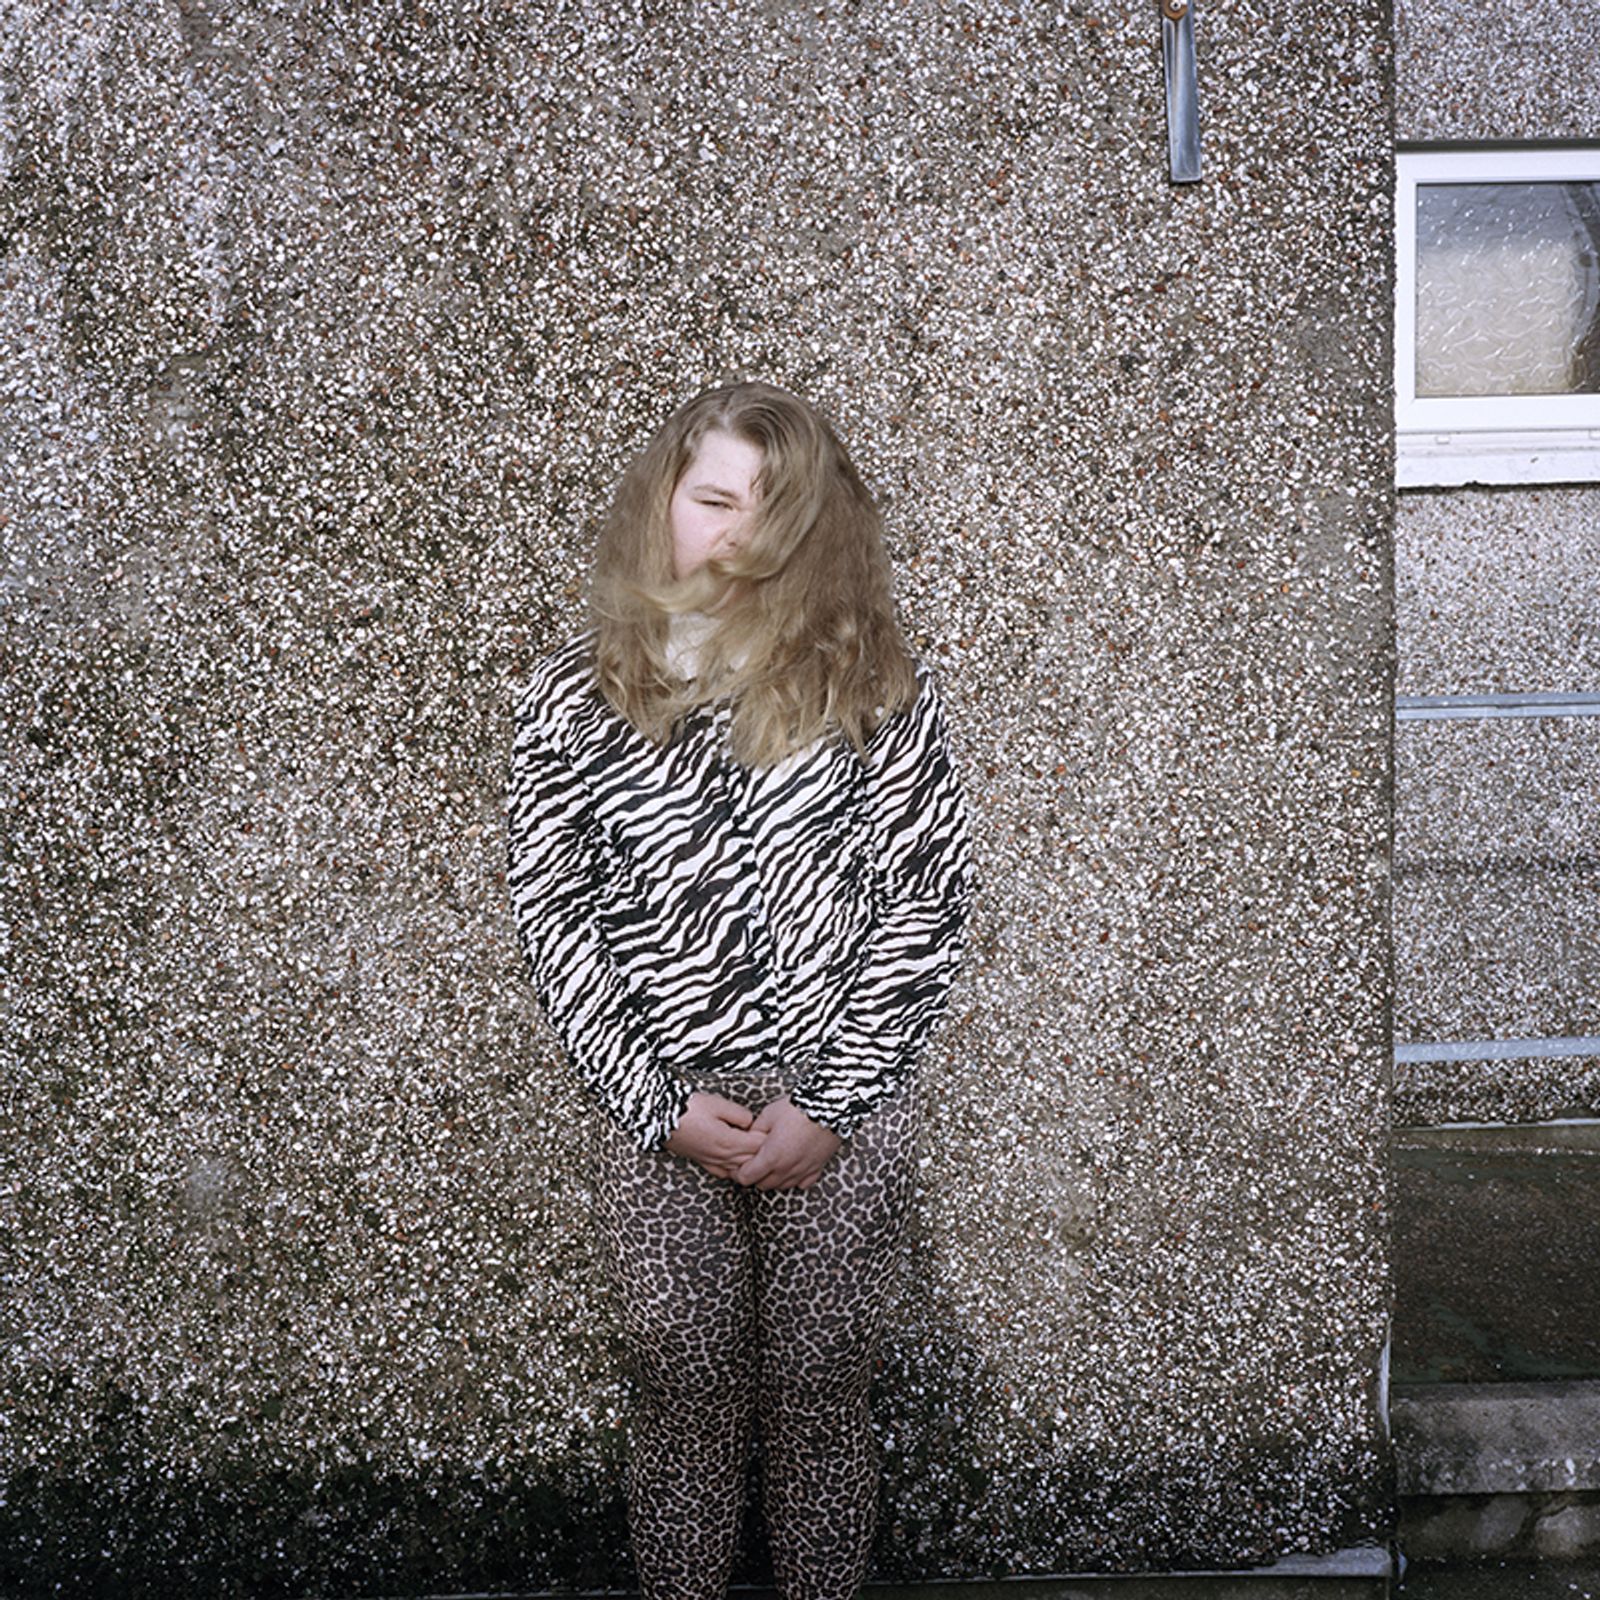 © Clémentine Schneidermann - Image from the heads of the valleys photography project